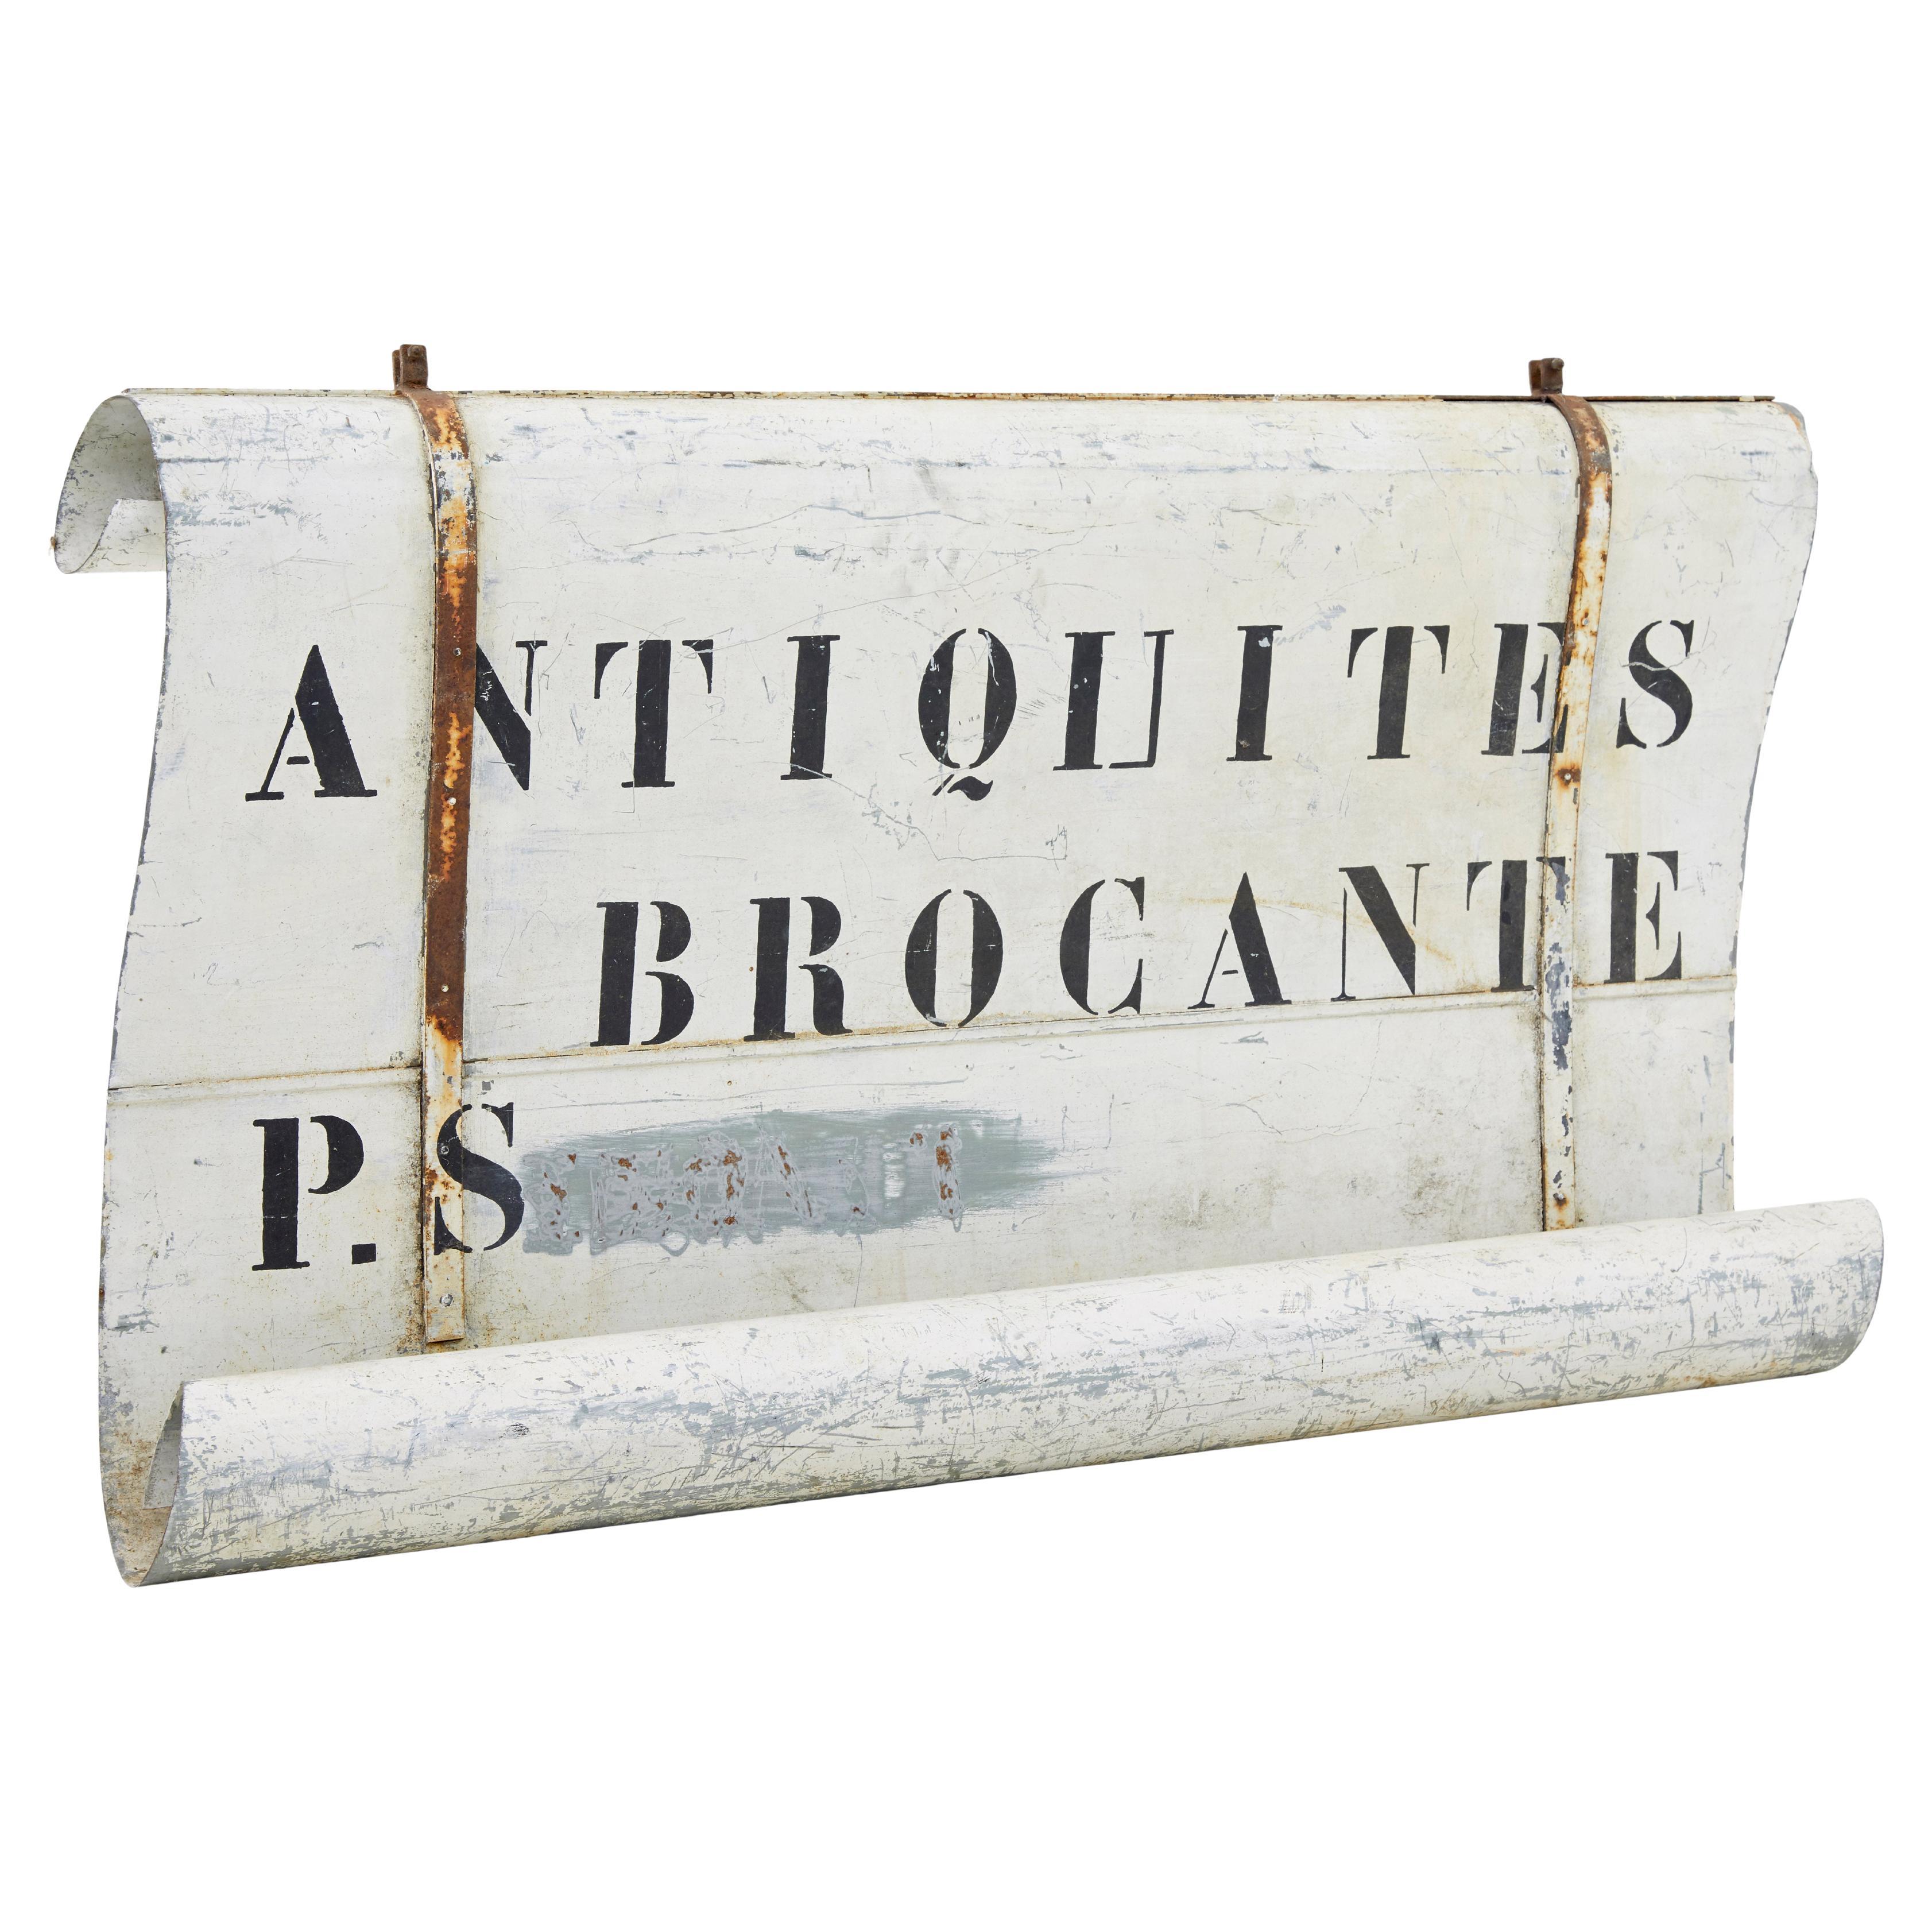 Early 20th century French antique street shop sign